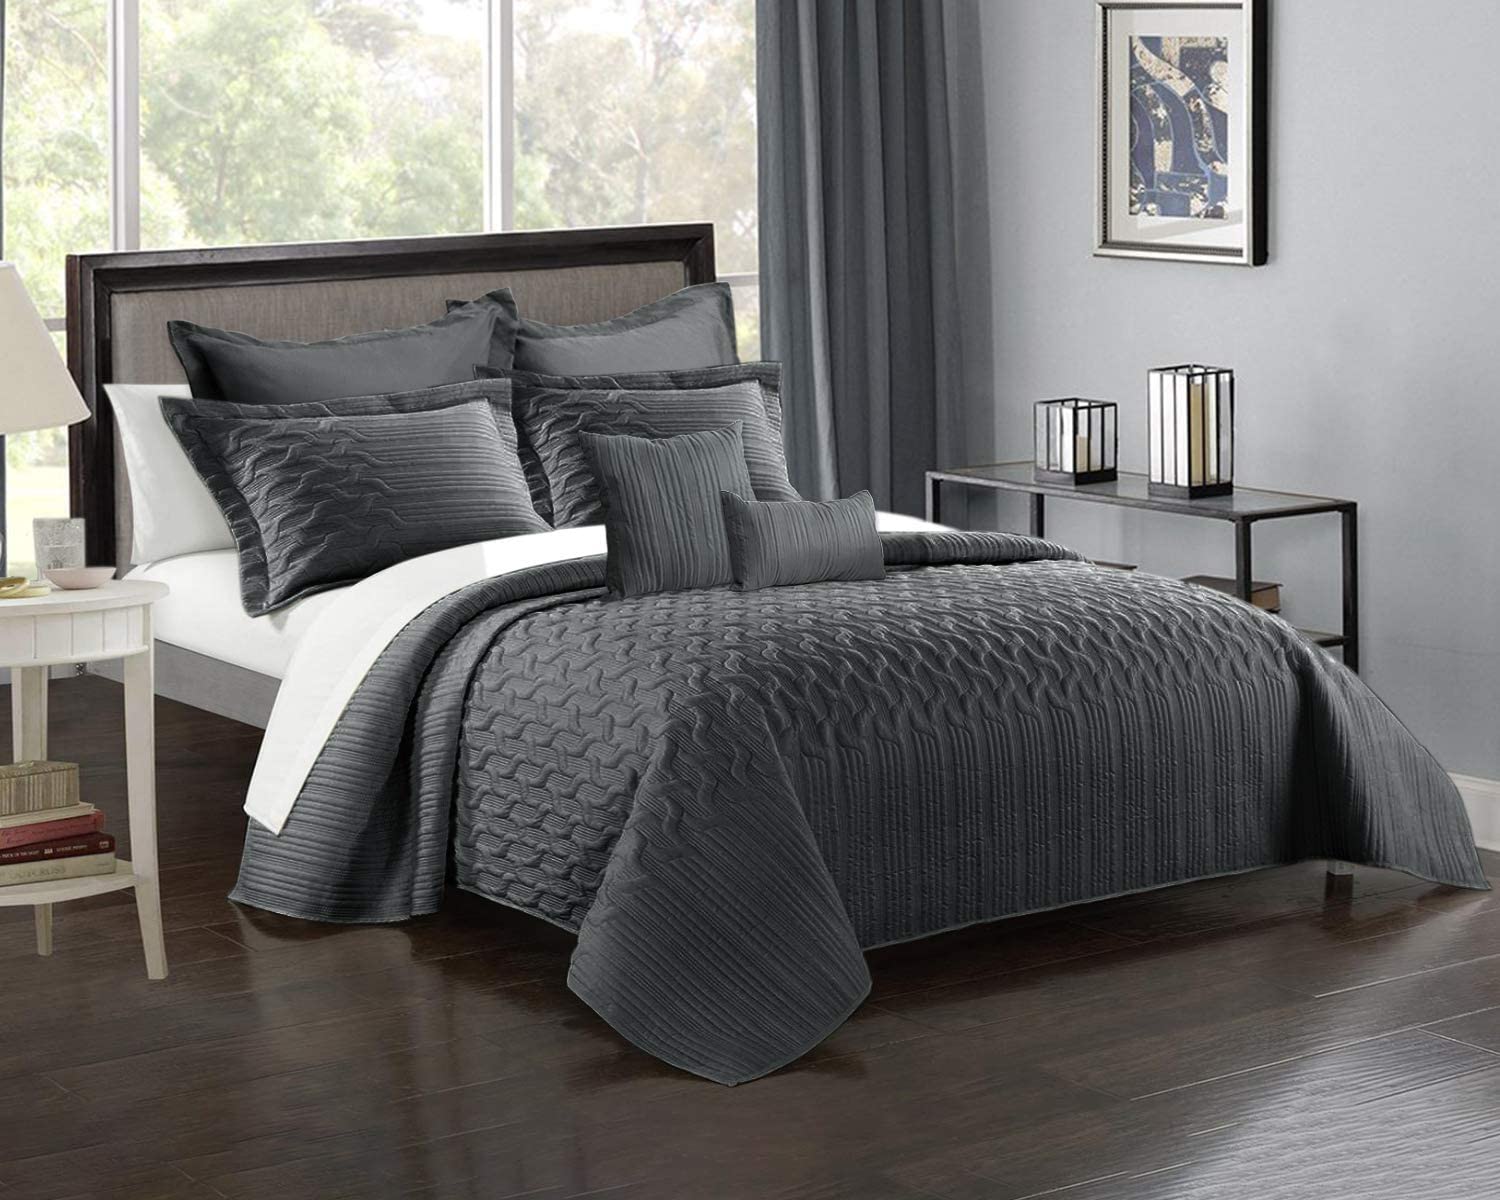 Complete Bed Sets with Blankets 